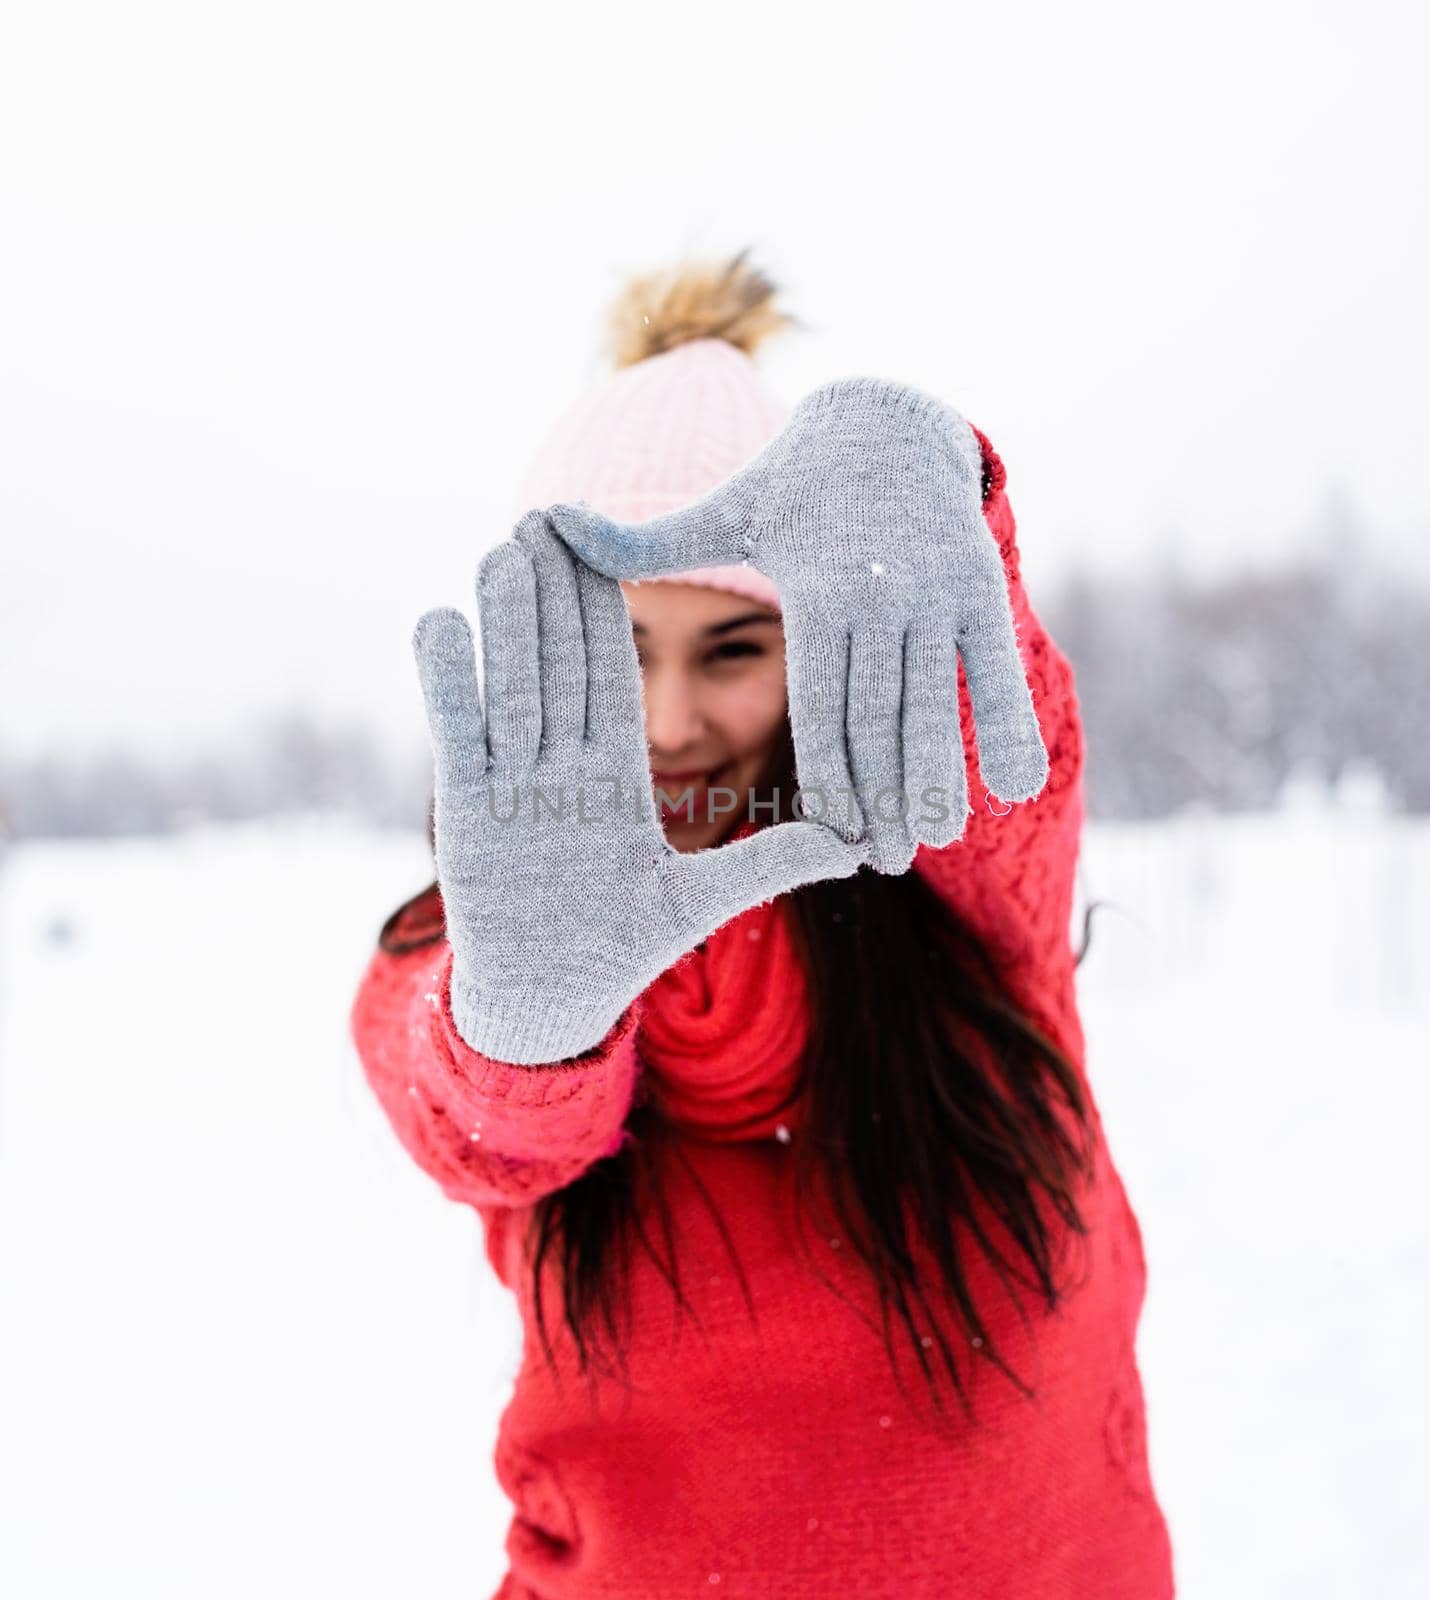 beautiful young woman in red sweater making frame sign with her hands outdoors in snowy day by Desperada